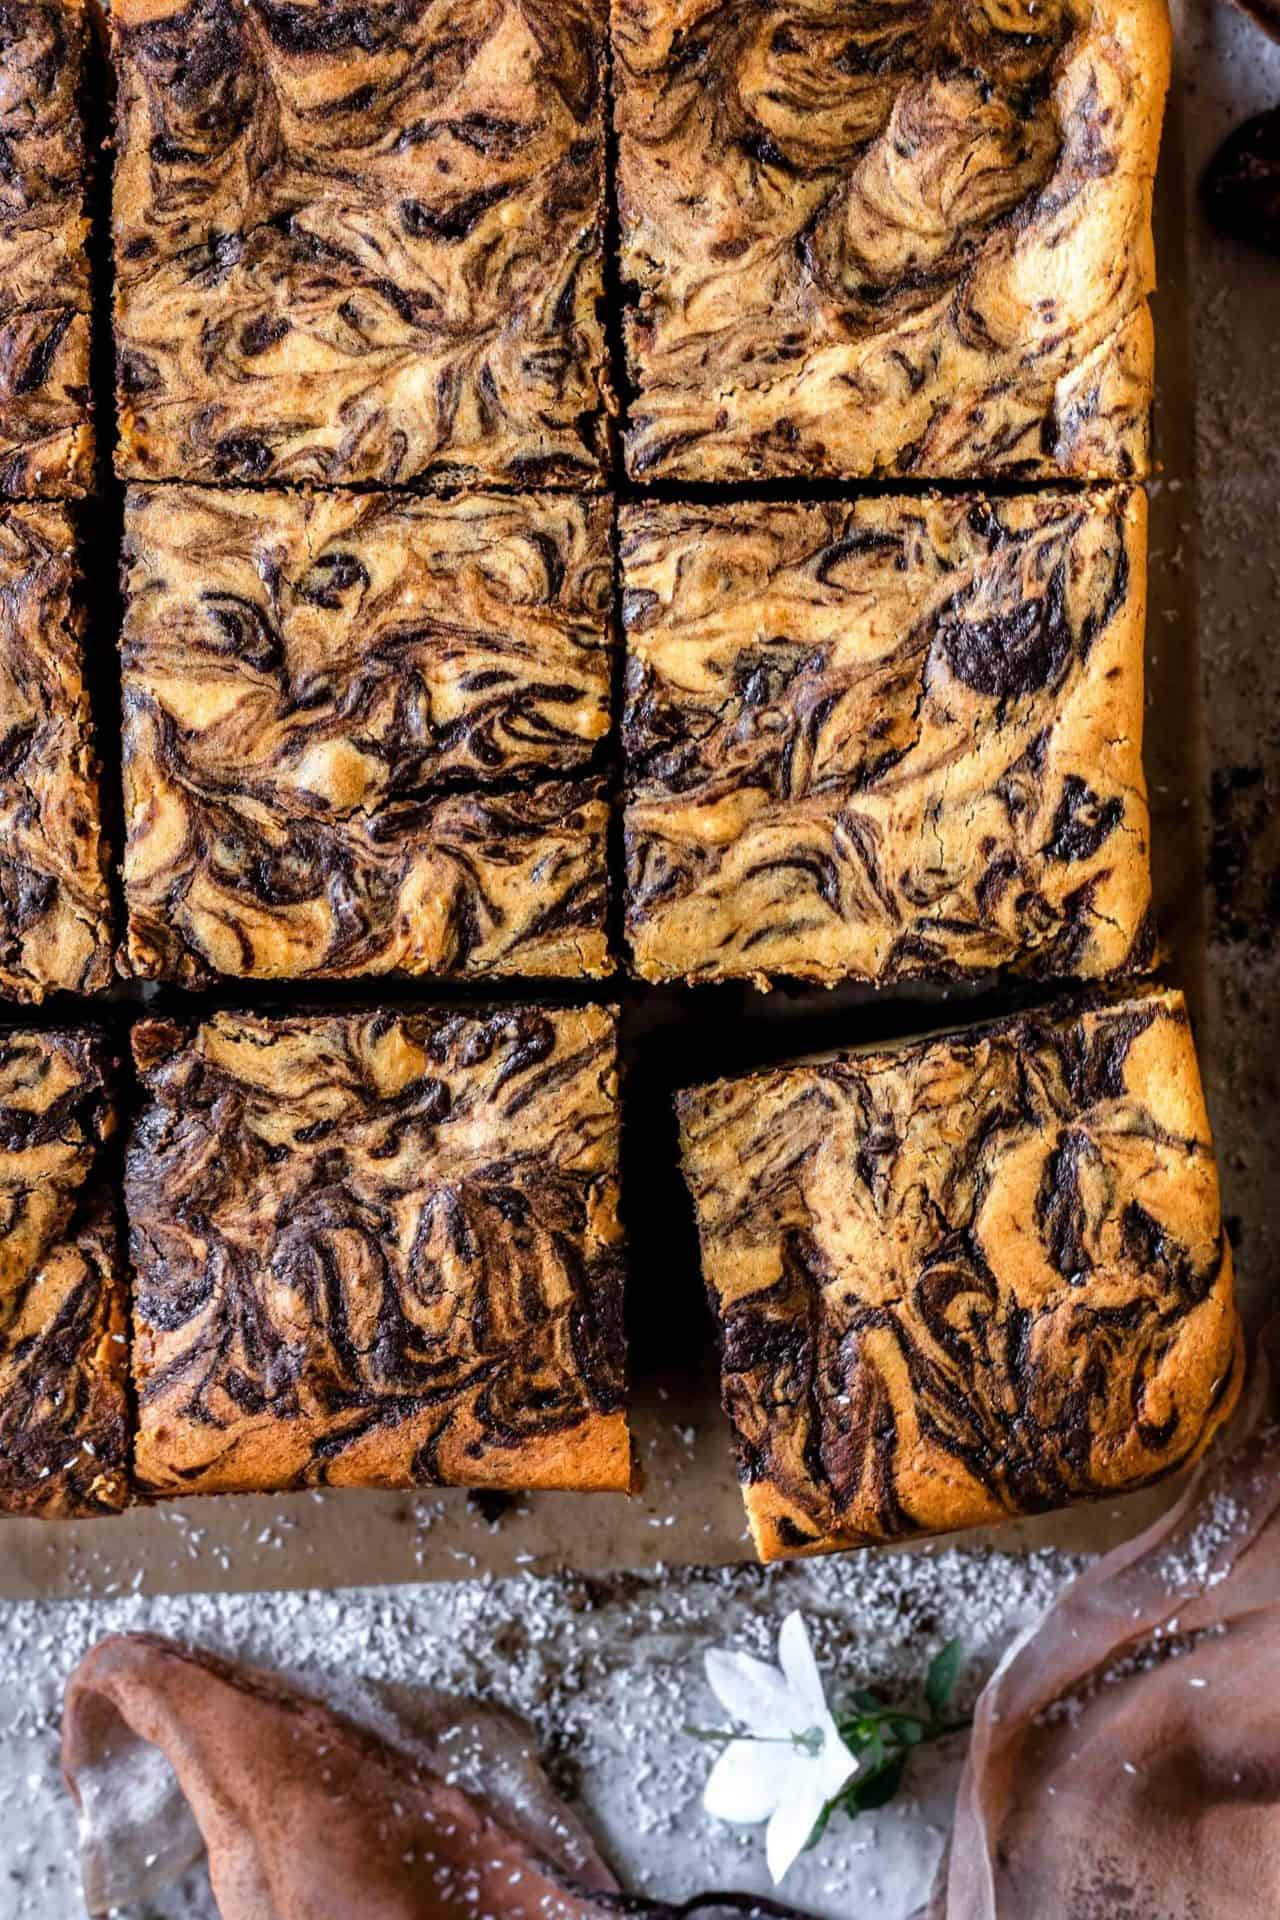 These Gluten-Free Pumpkin Cheesecake Brownies are perfectly sweetened, super chocolaty, pumpkin-infused, gooey, and just so delicious!